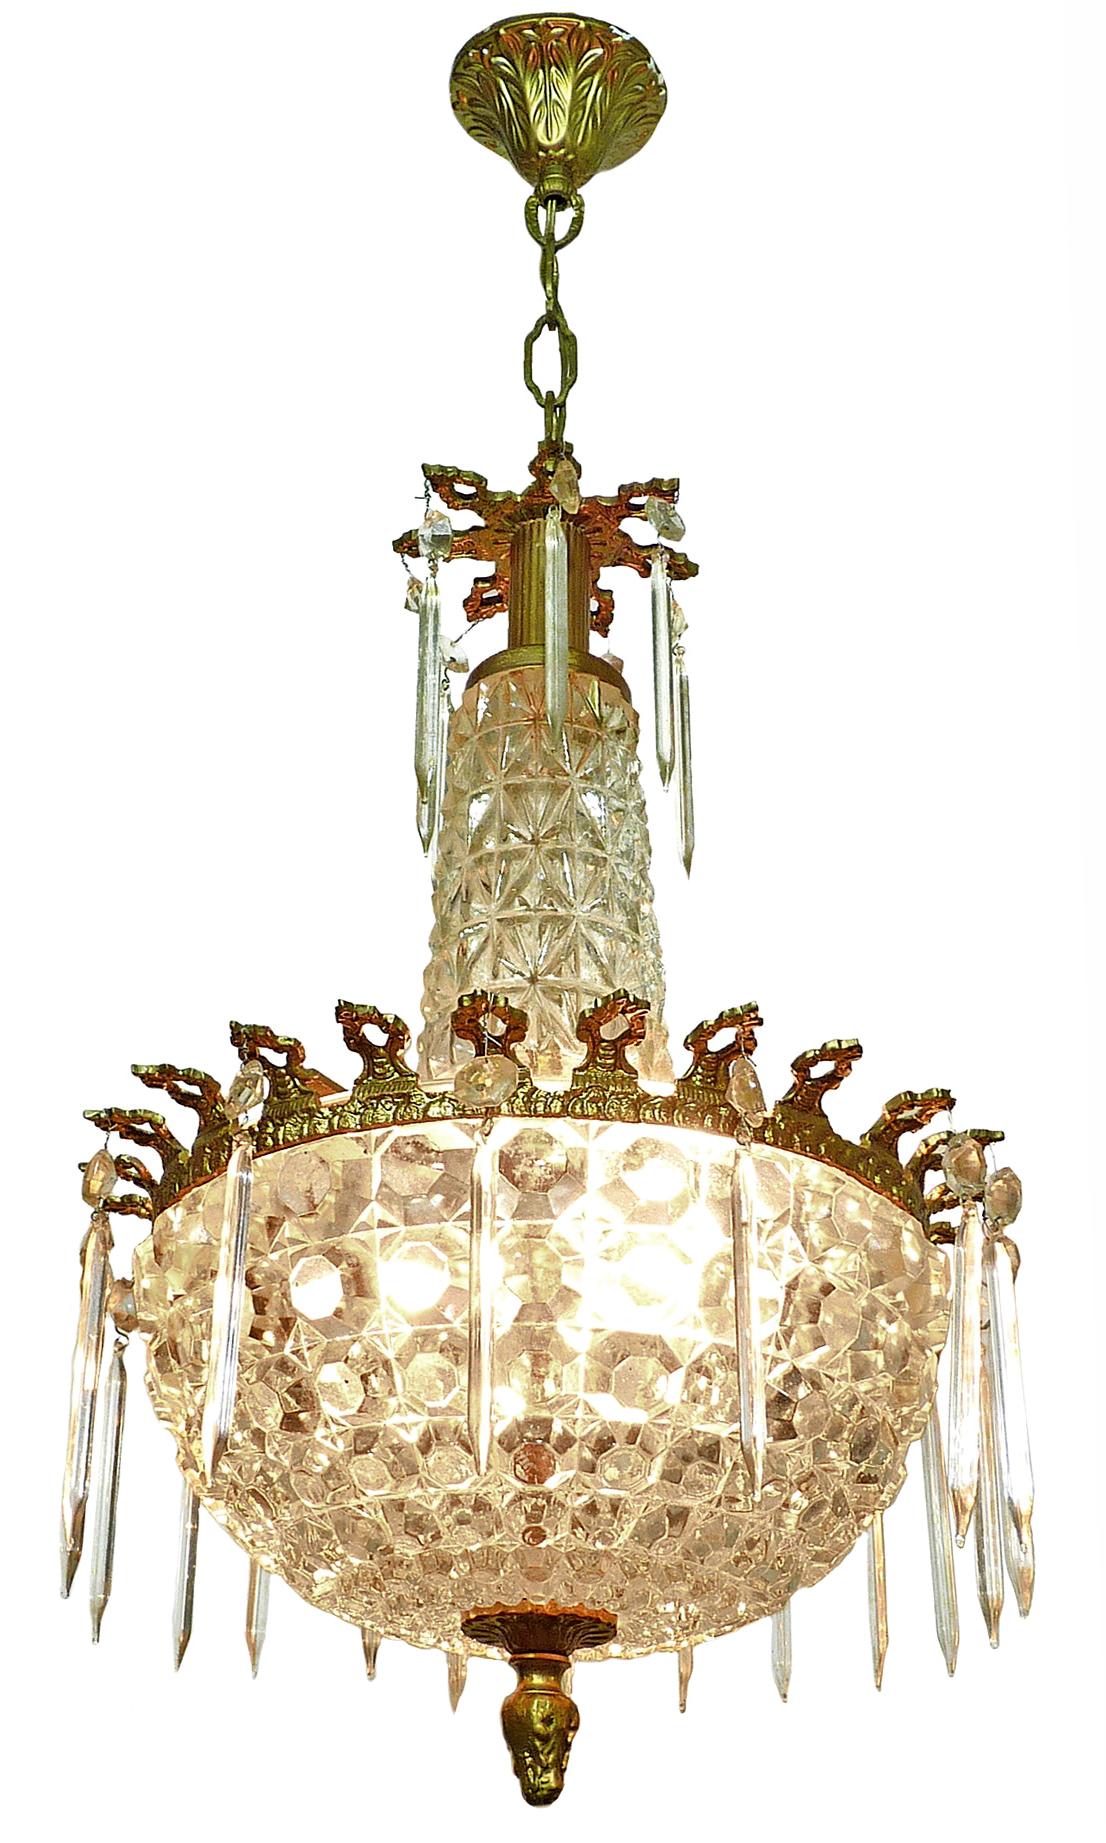 Beautiful 1950s antique French Art Deco gilt bronze and thick glass 2-light crystal teardrop chandelier
Measures:
Diameter 11.8 in / 30 cm
Height 27.55 in (5 in/chain); 70 cm (12 cm/chain)
Weight 15 lb. (7 kg).
2 light bulbs E14
Good working